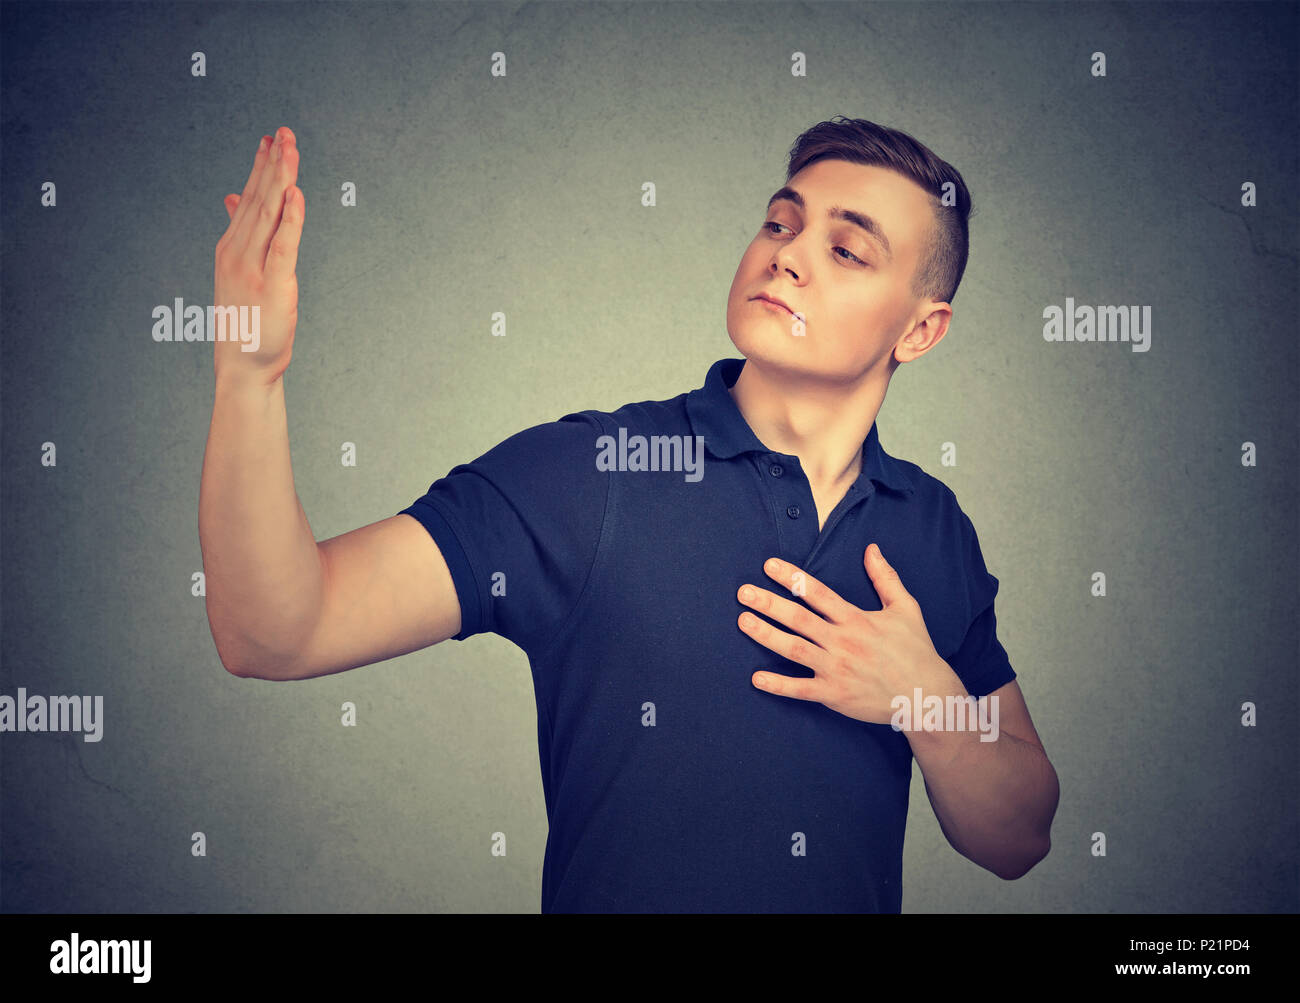 Arrogant self important man isolated on gray background. Human emotion facial expression Stock Photo